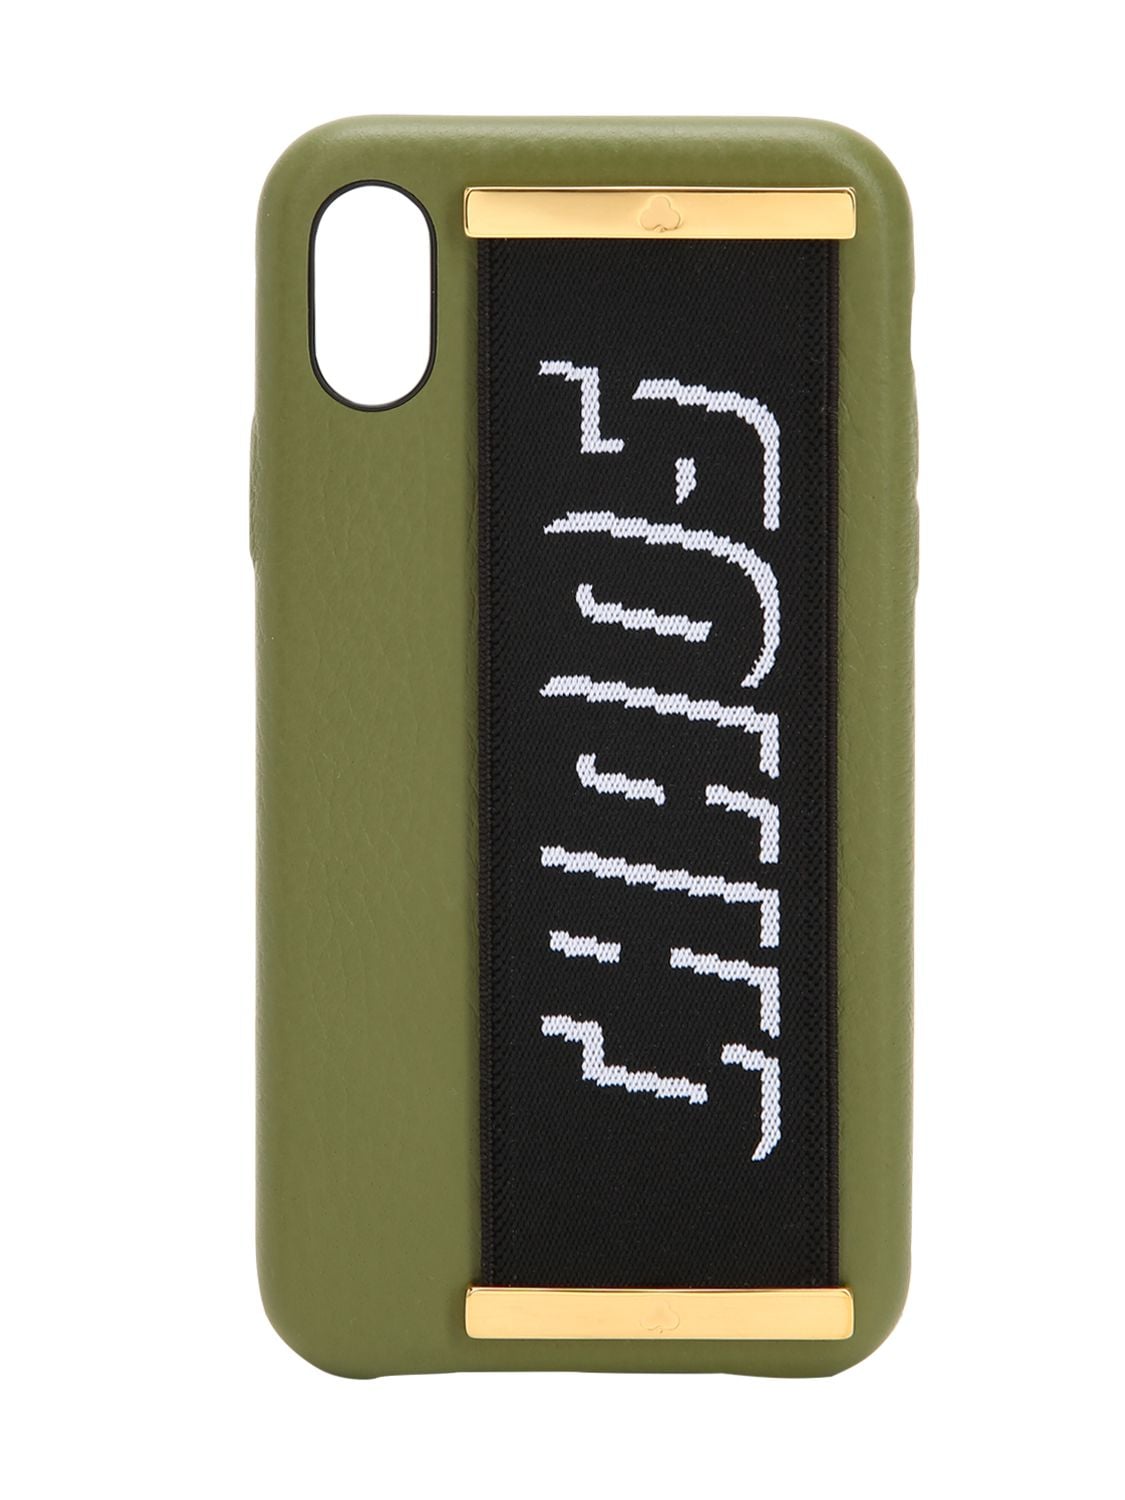 Chaos Logo Strap Leather Iphone 7/8 Plus Cover In Khaki/black